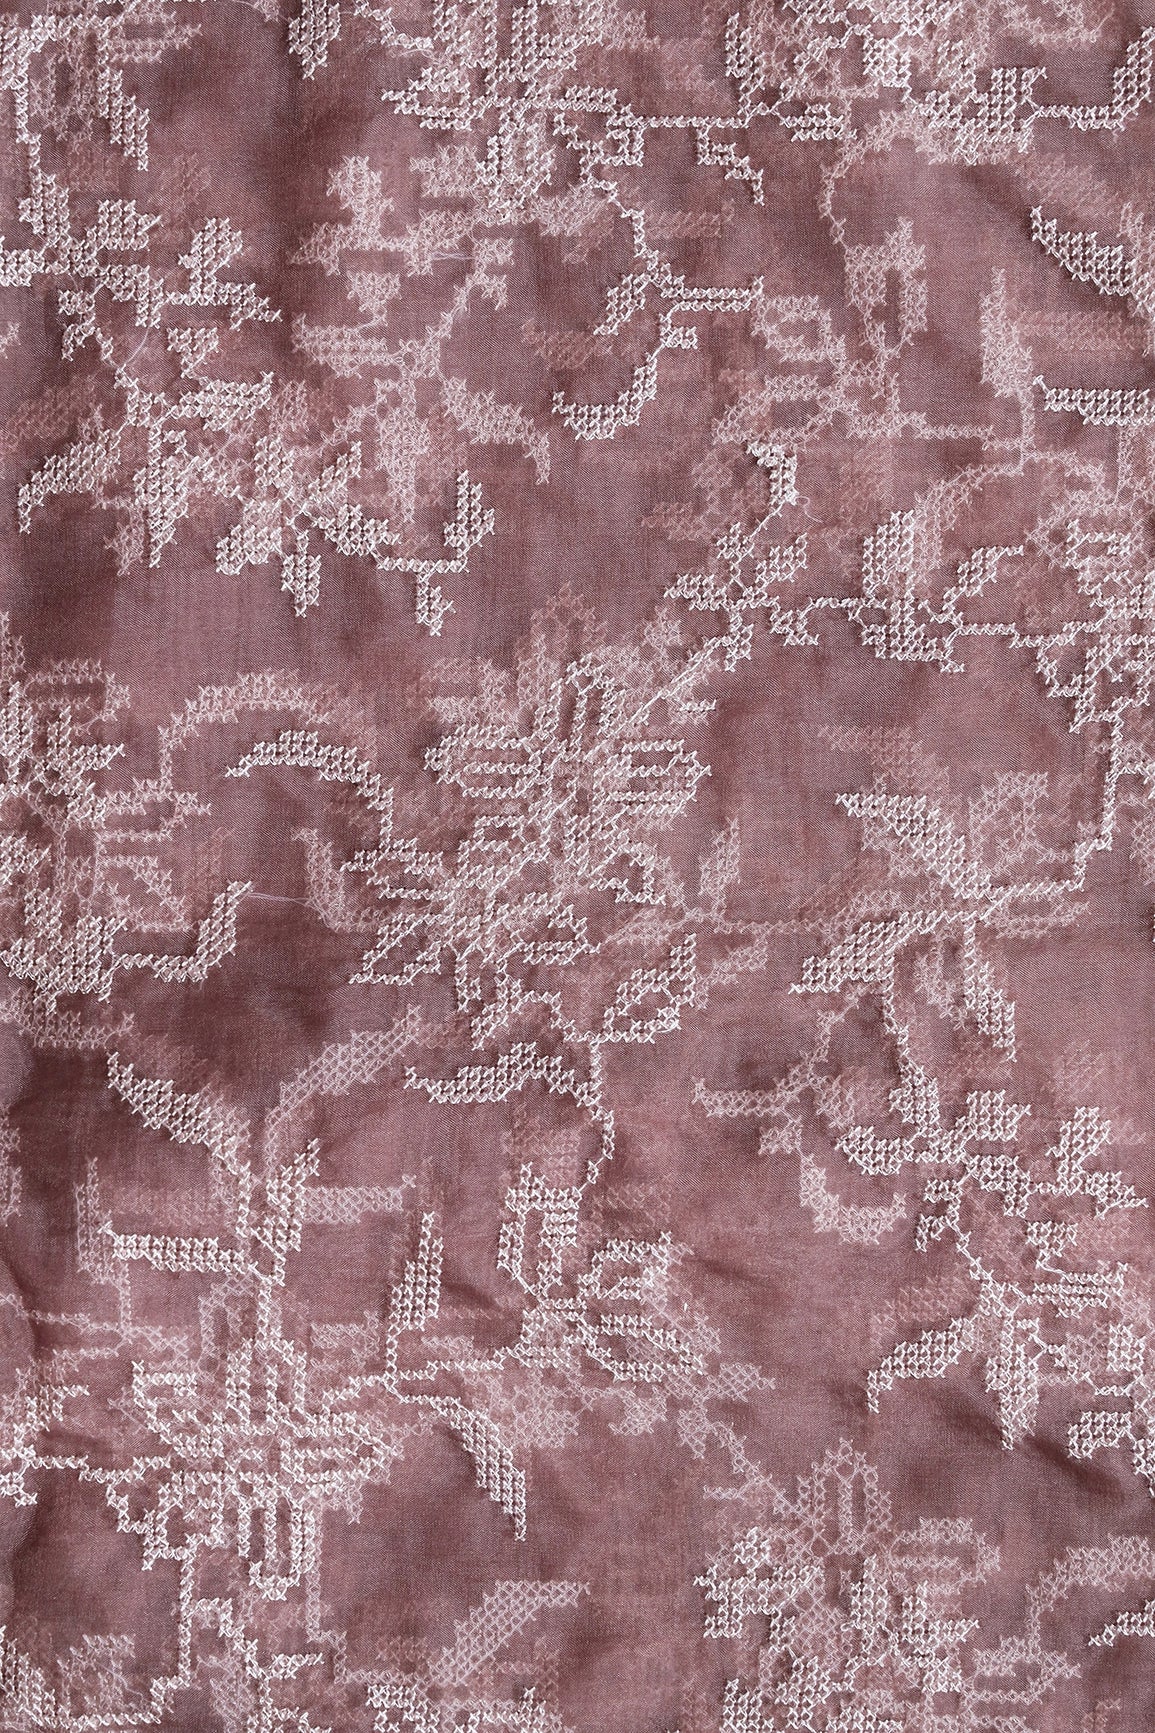 White Thread Magnificent Floral Embroidery Work On Mauve Organza Fabric